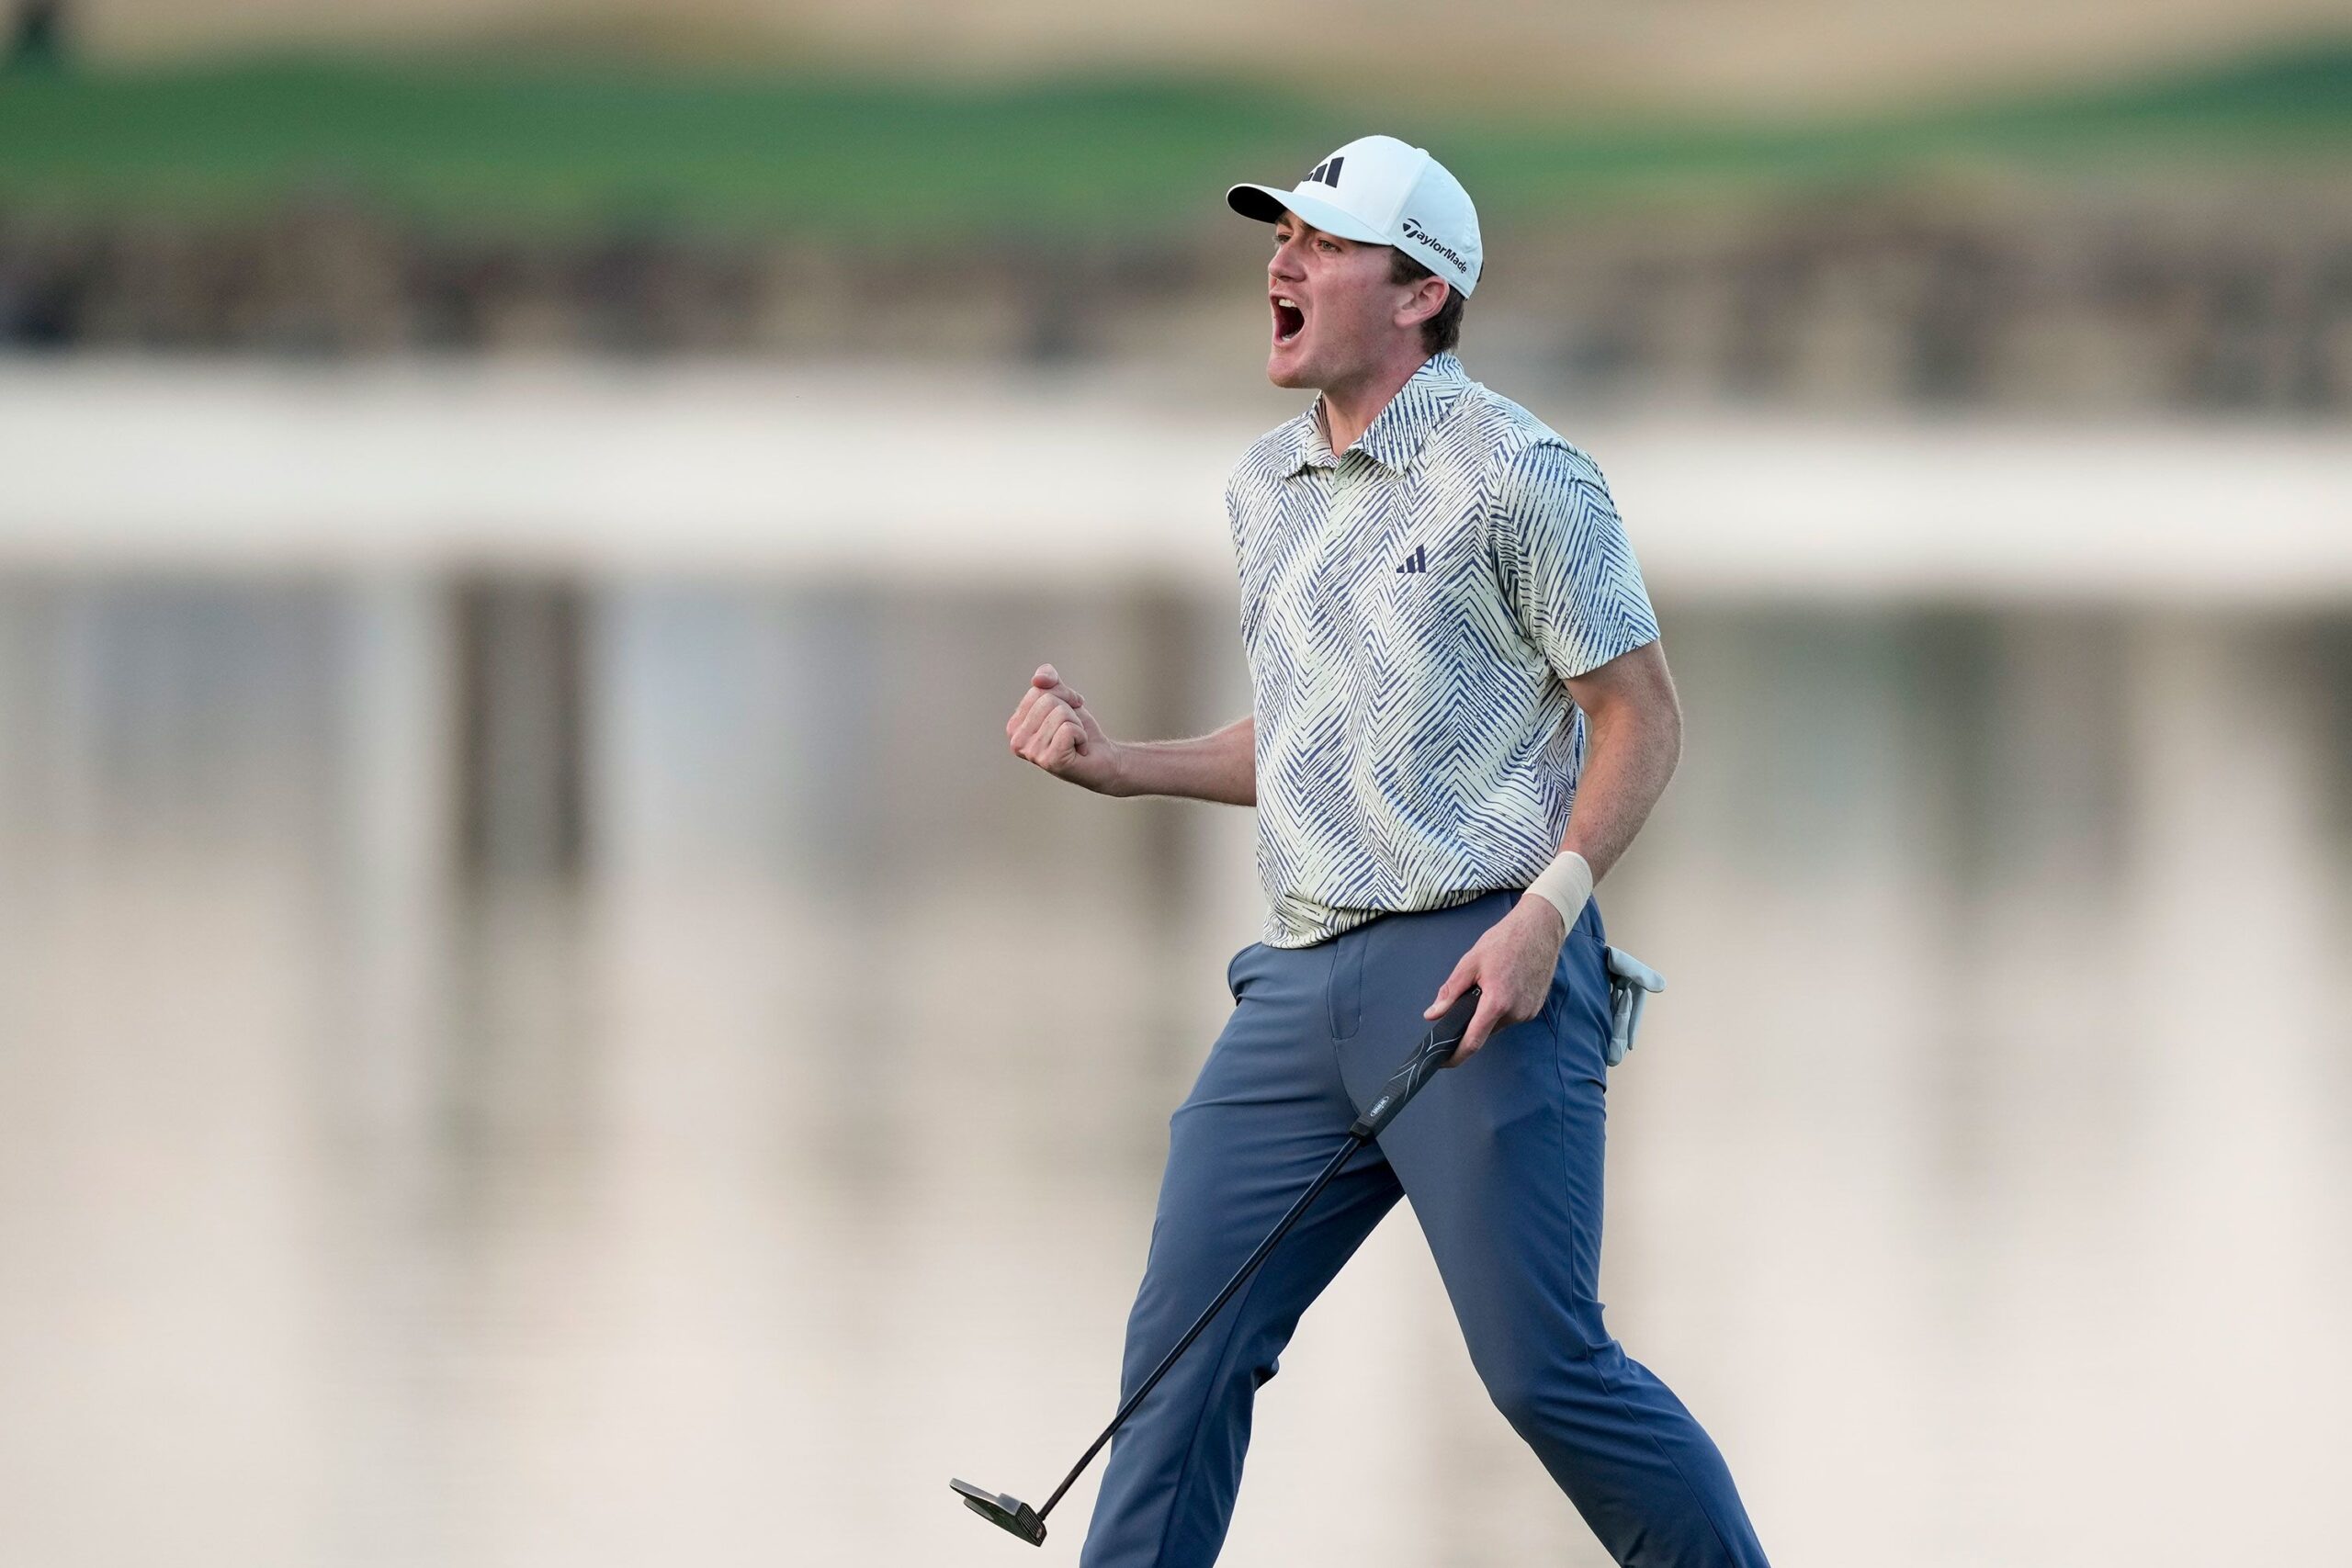 Nick Dunlap reacts after making his putt on the 18th hole of the Pete Dye Stadium Course during the...